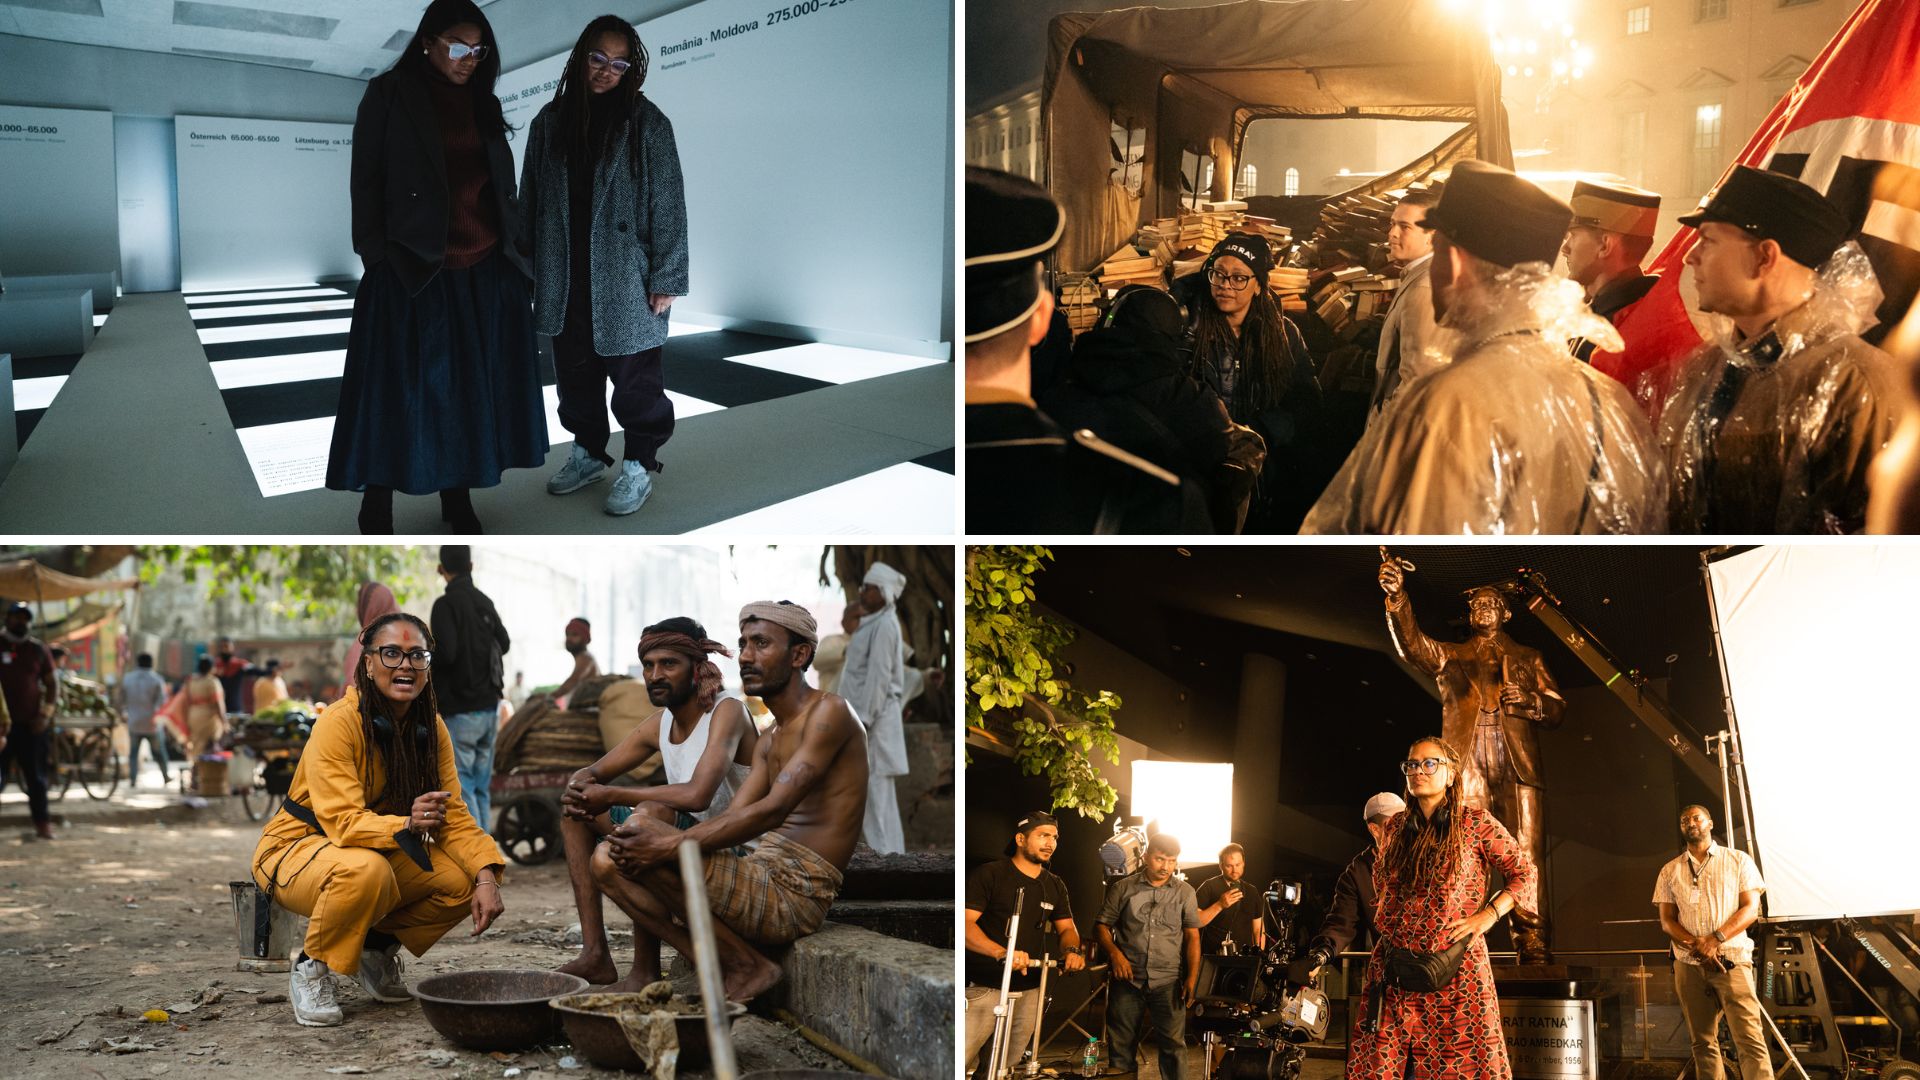 Ava DuVernay directing her film Origin in India and Germany